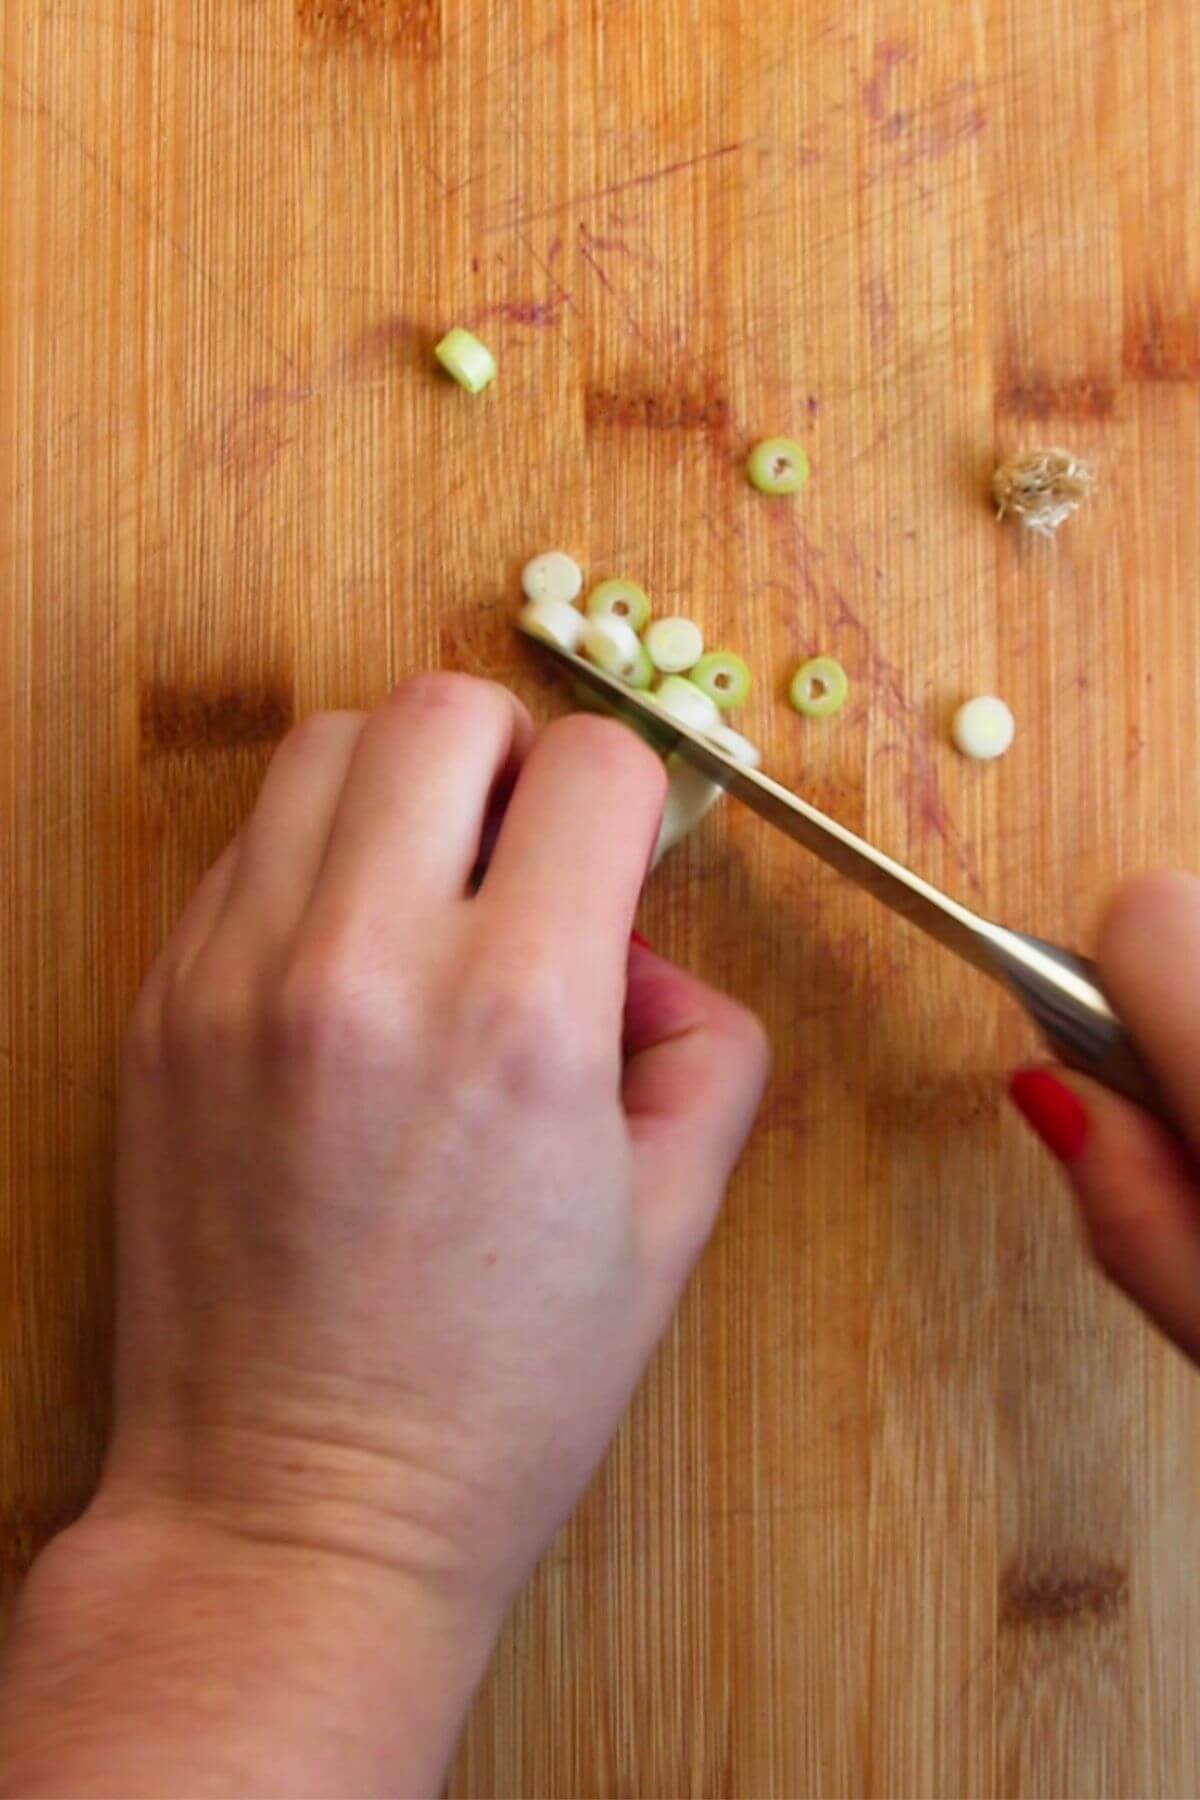 Hand holding spring onion and slicing it with a small knife.